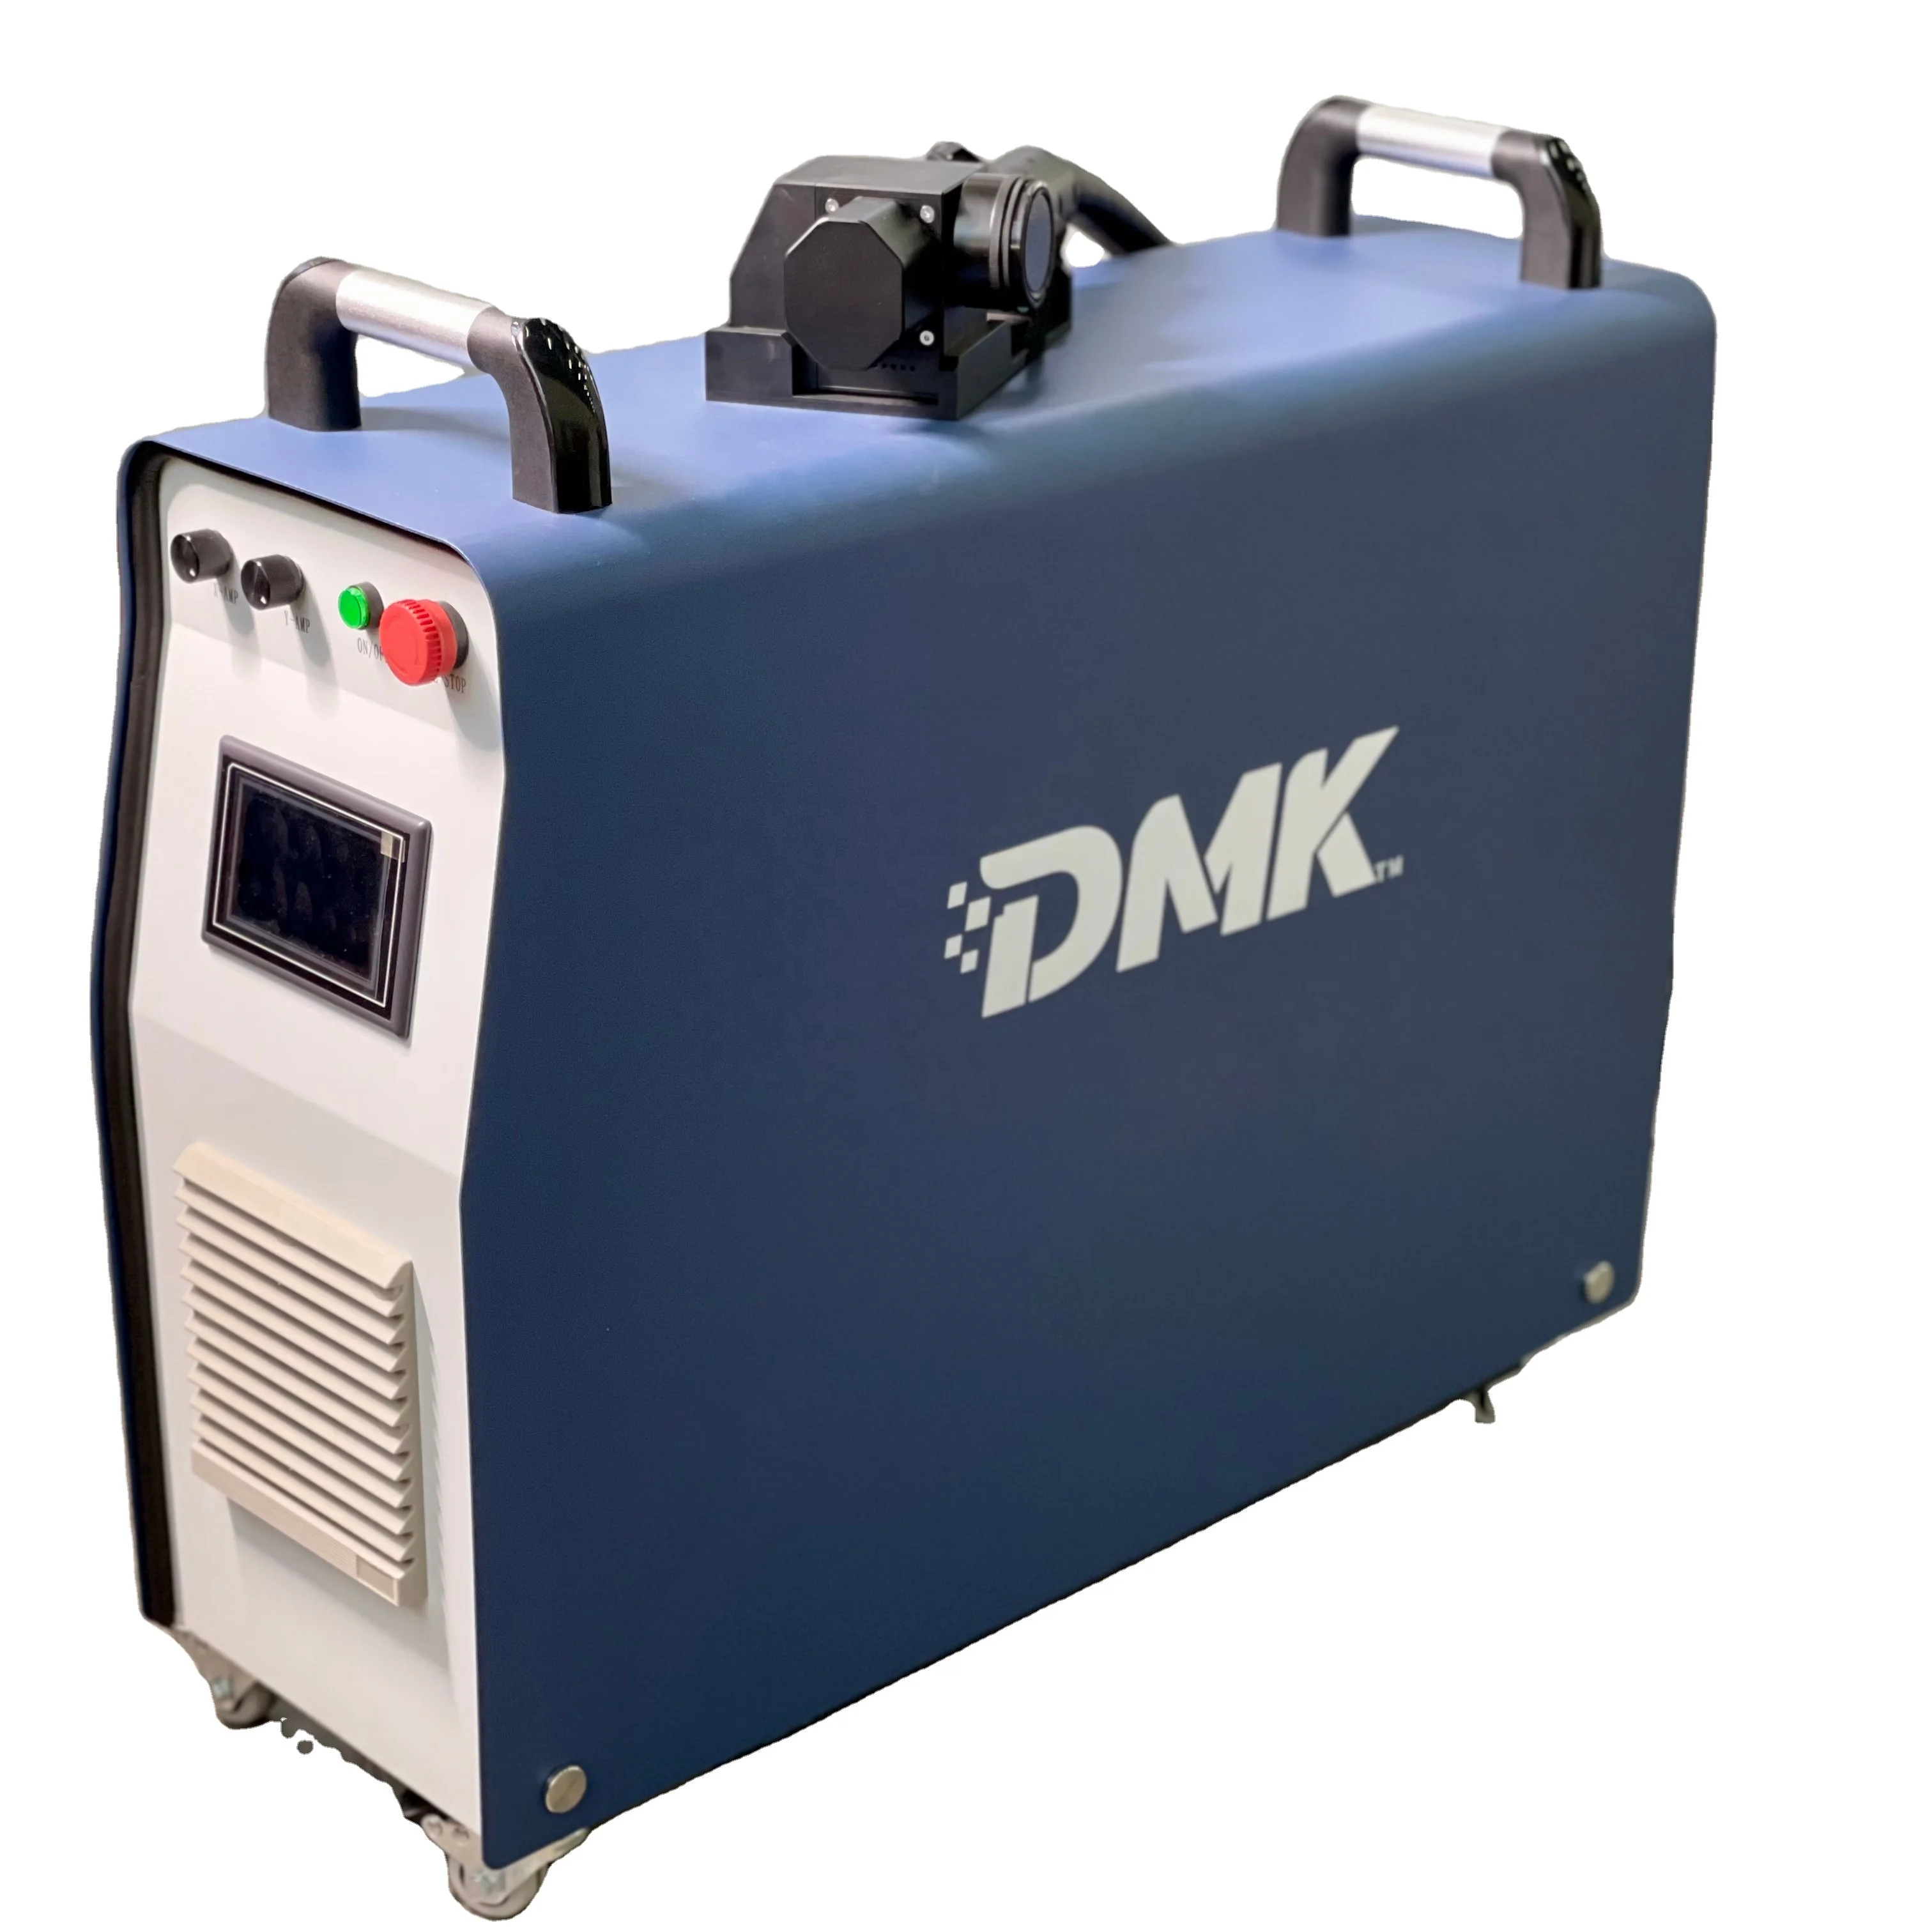 

50W 100W 200W DMK Pulsed Fiber Laser Cleaning Machine Rust Removal Brick Oil Coating Paint Cleaner Lazer Cleaning Tools